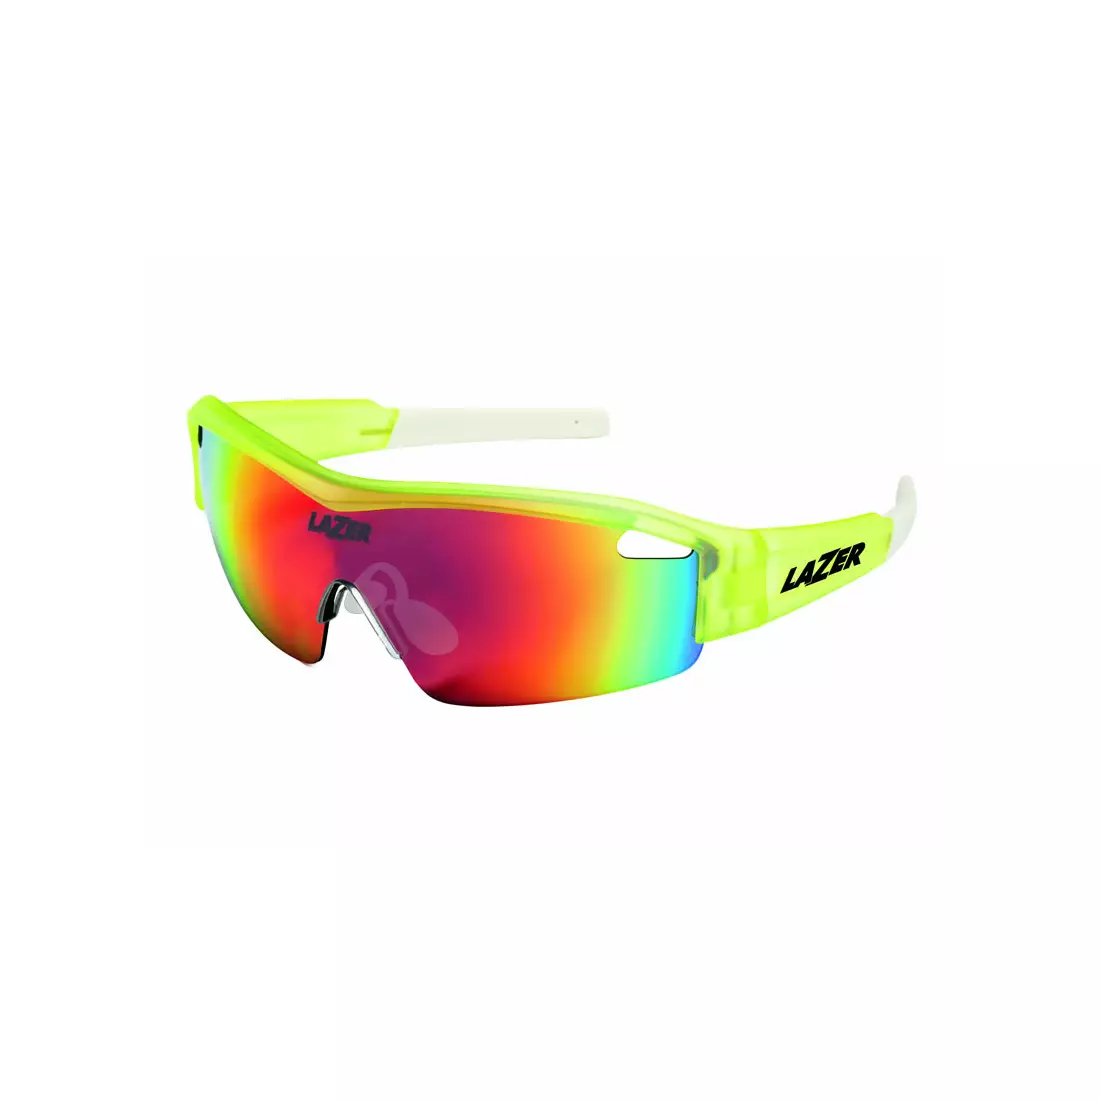 LAZER SOLID STATE1 Flash Yellow glasses (Smoke-Black Red REVO. Yellow-Blue Mirror. Clear) LZR-OKL-SOLD-FLYELL